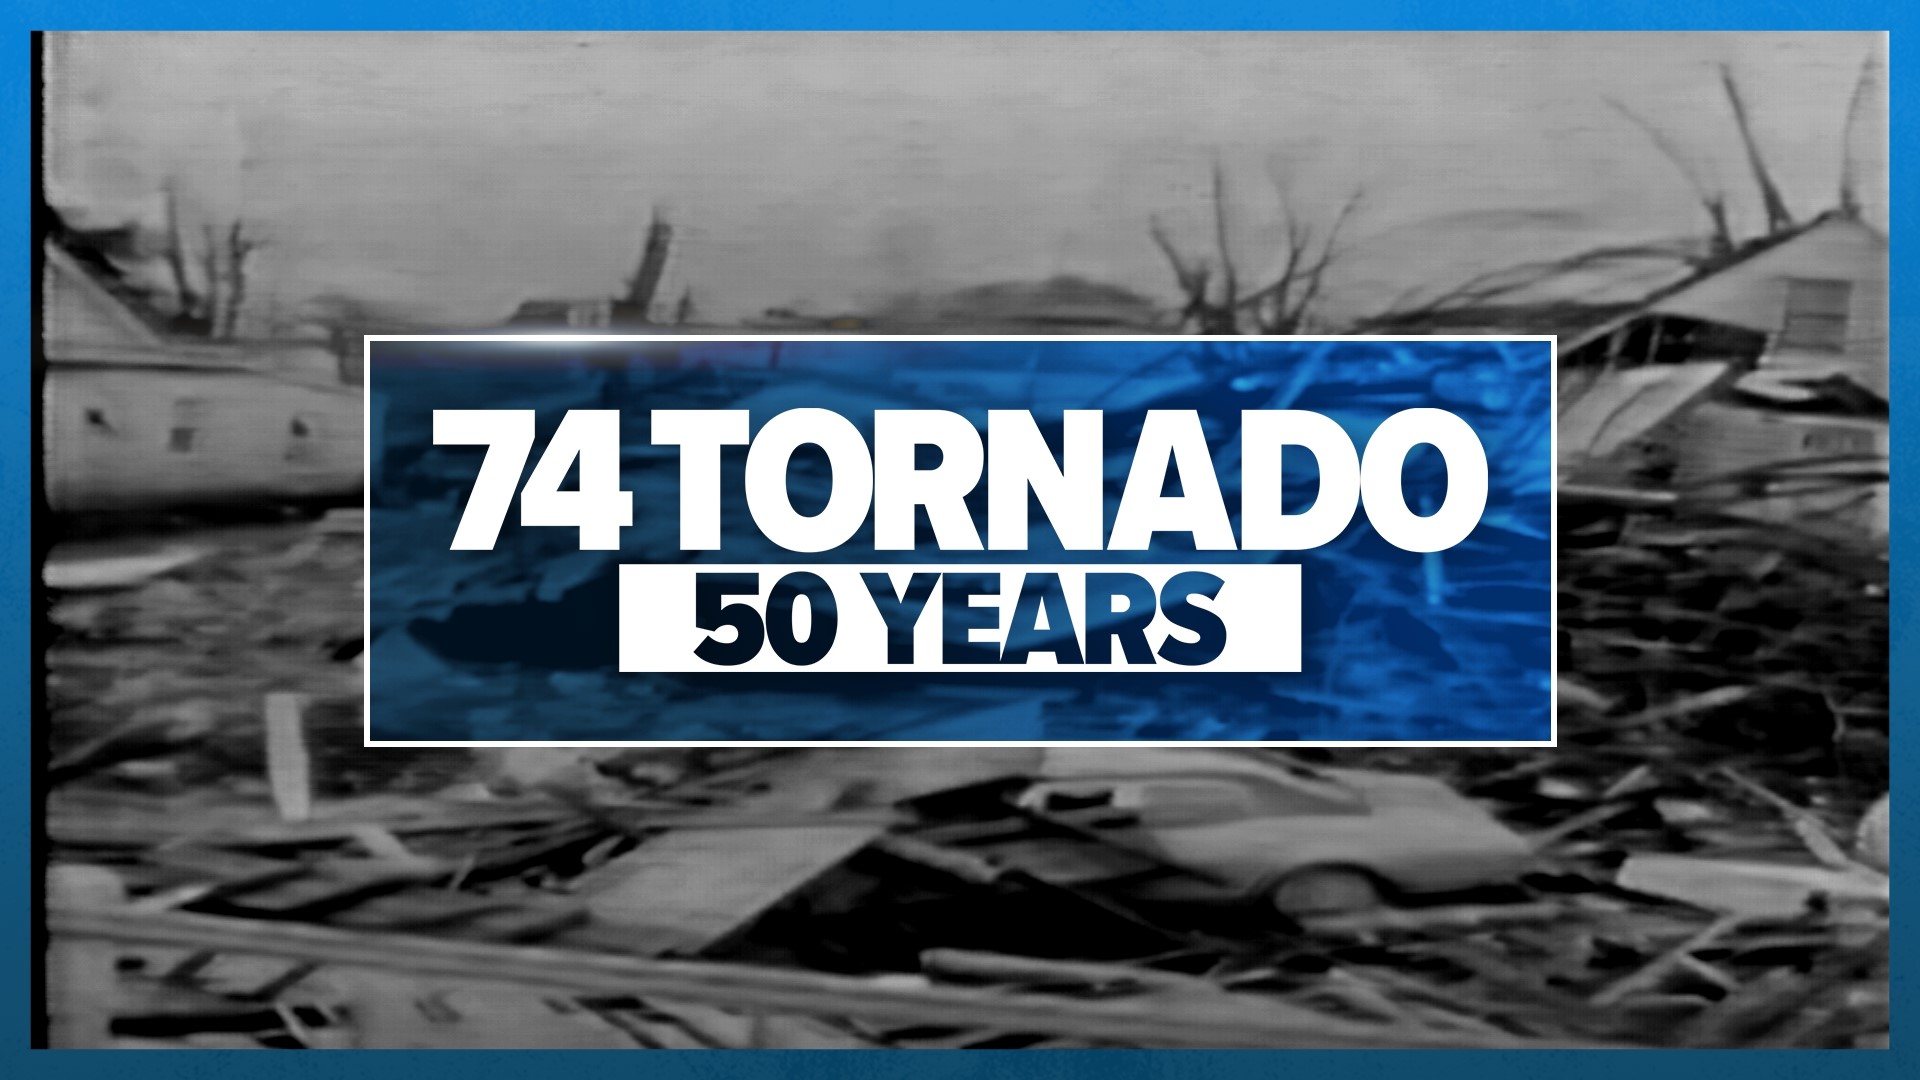 This year marks half a century since a series of destructive tornadoes struck across the Midwest, South, and East of the U.S., plus Ontario, Canada.